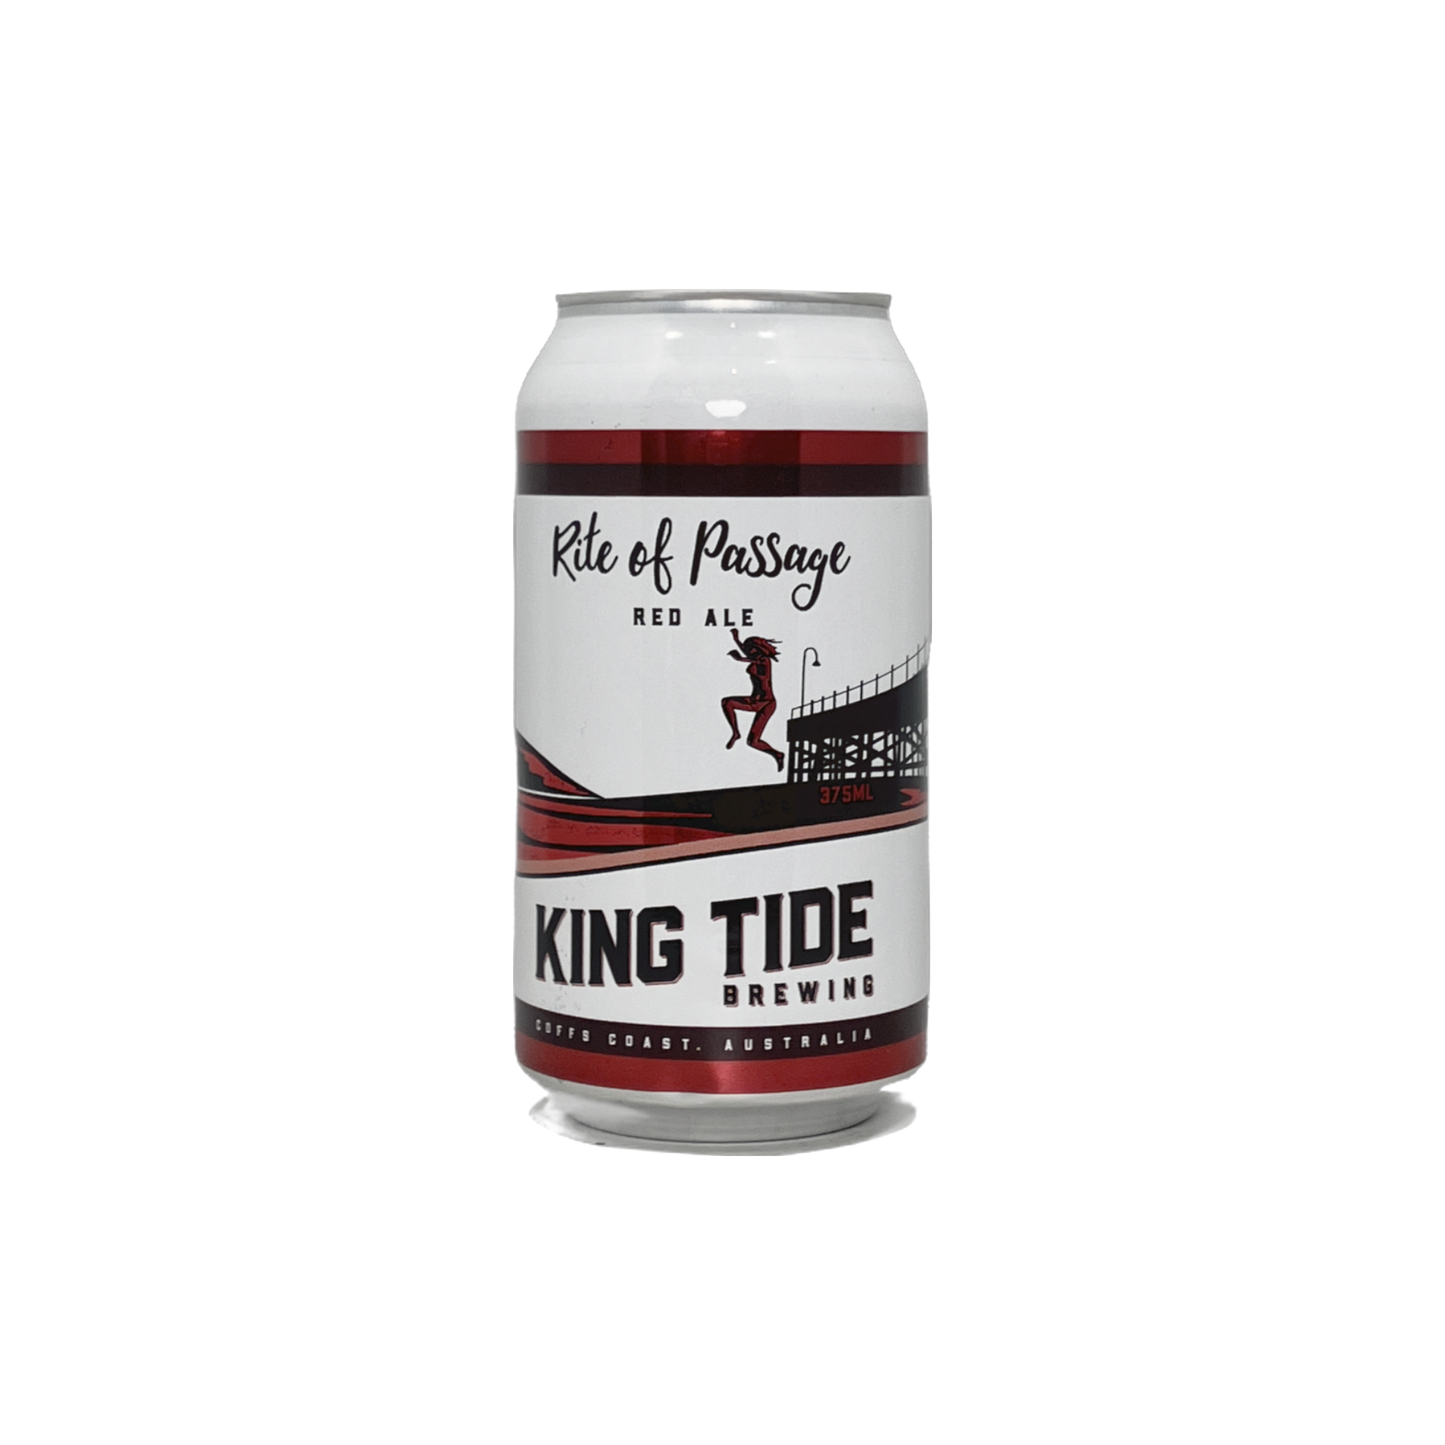 King Tide Rite Of Passage Red Ale 375ml